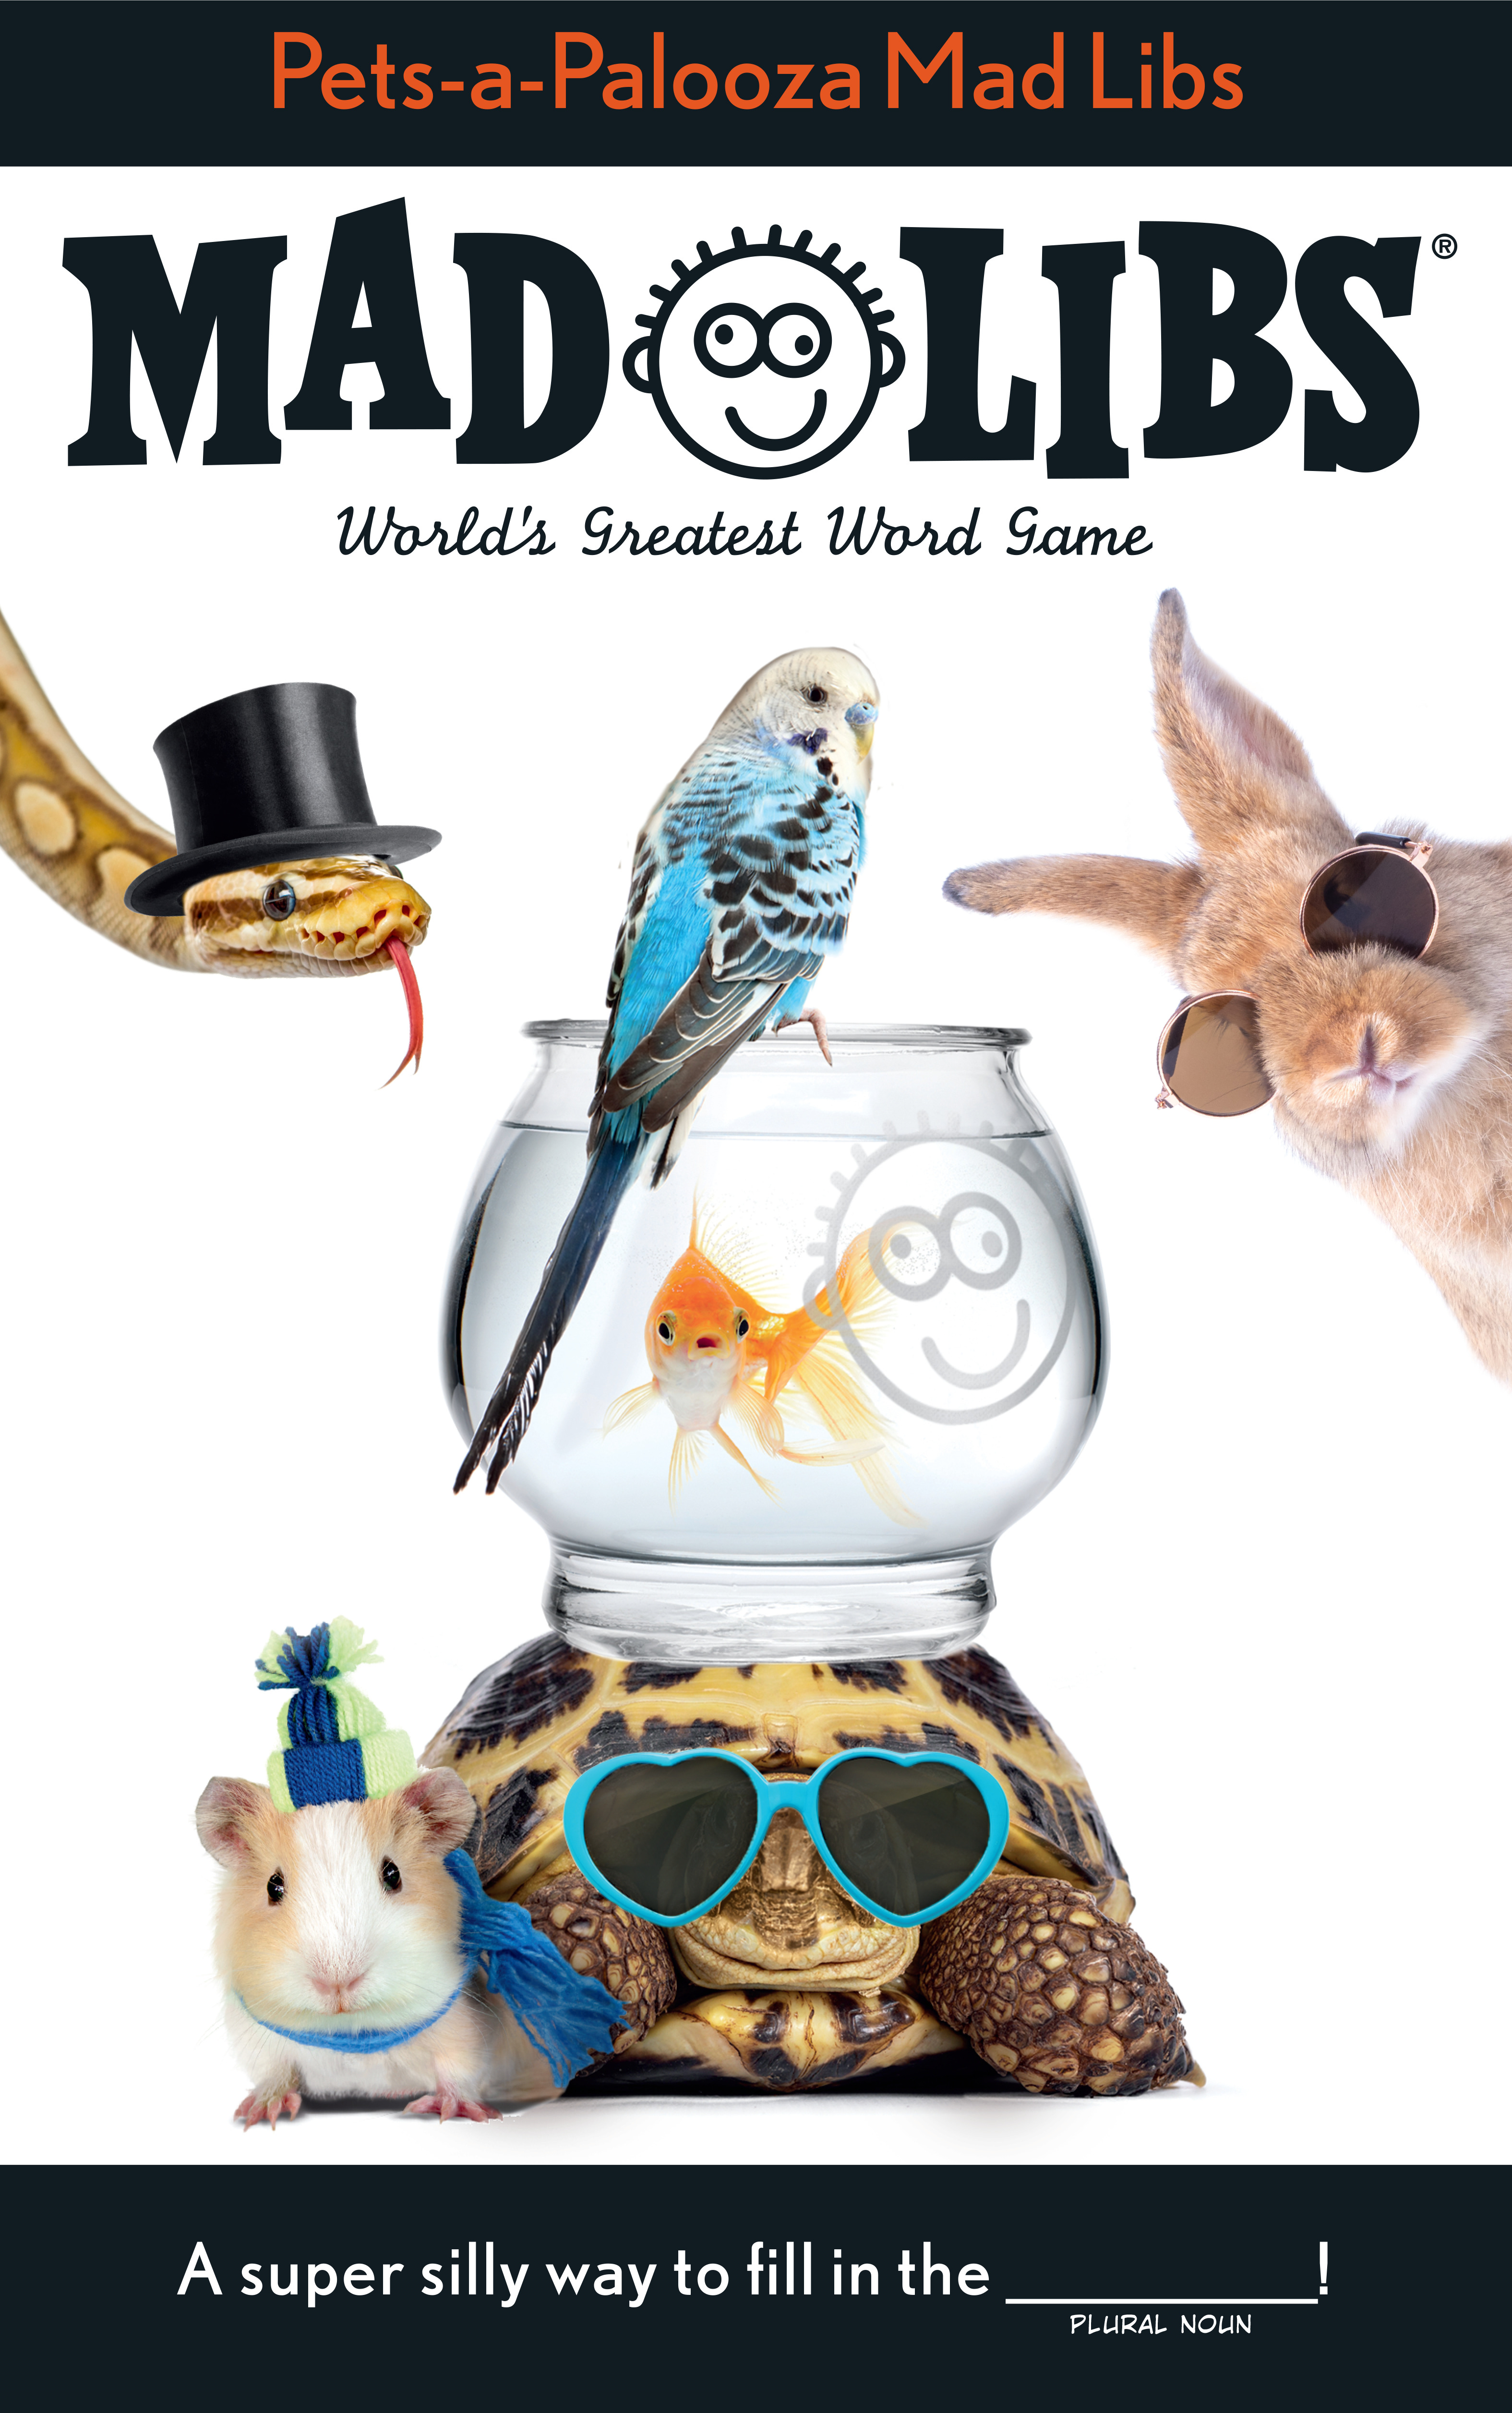 Pets-a-Palooza Mad Libs - World's Greatest Word Game | First reader